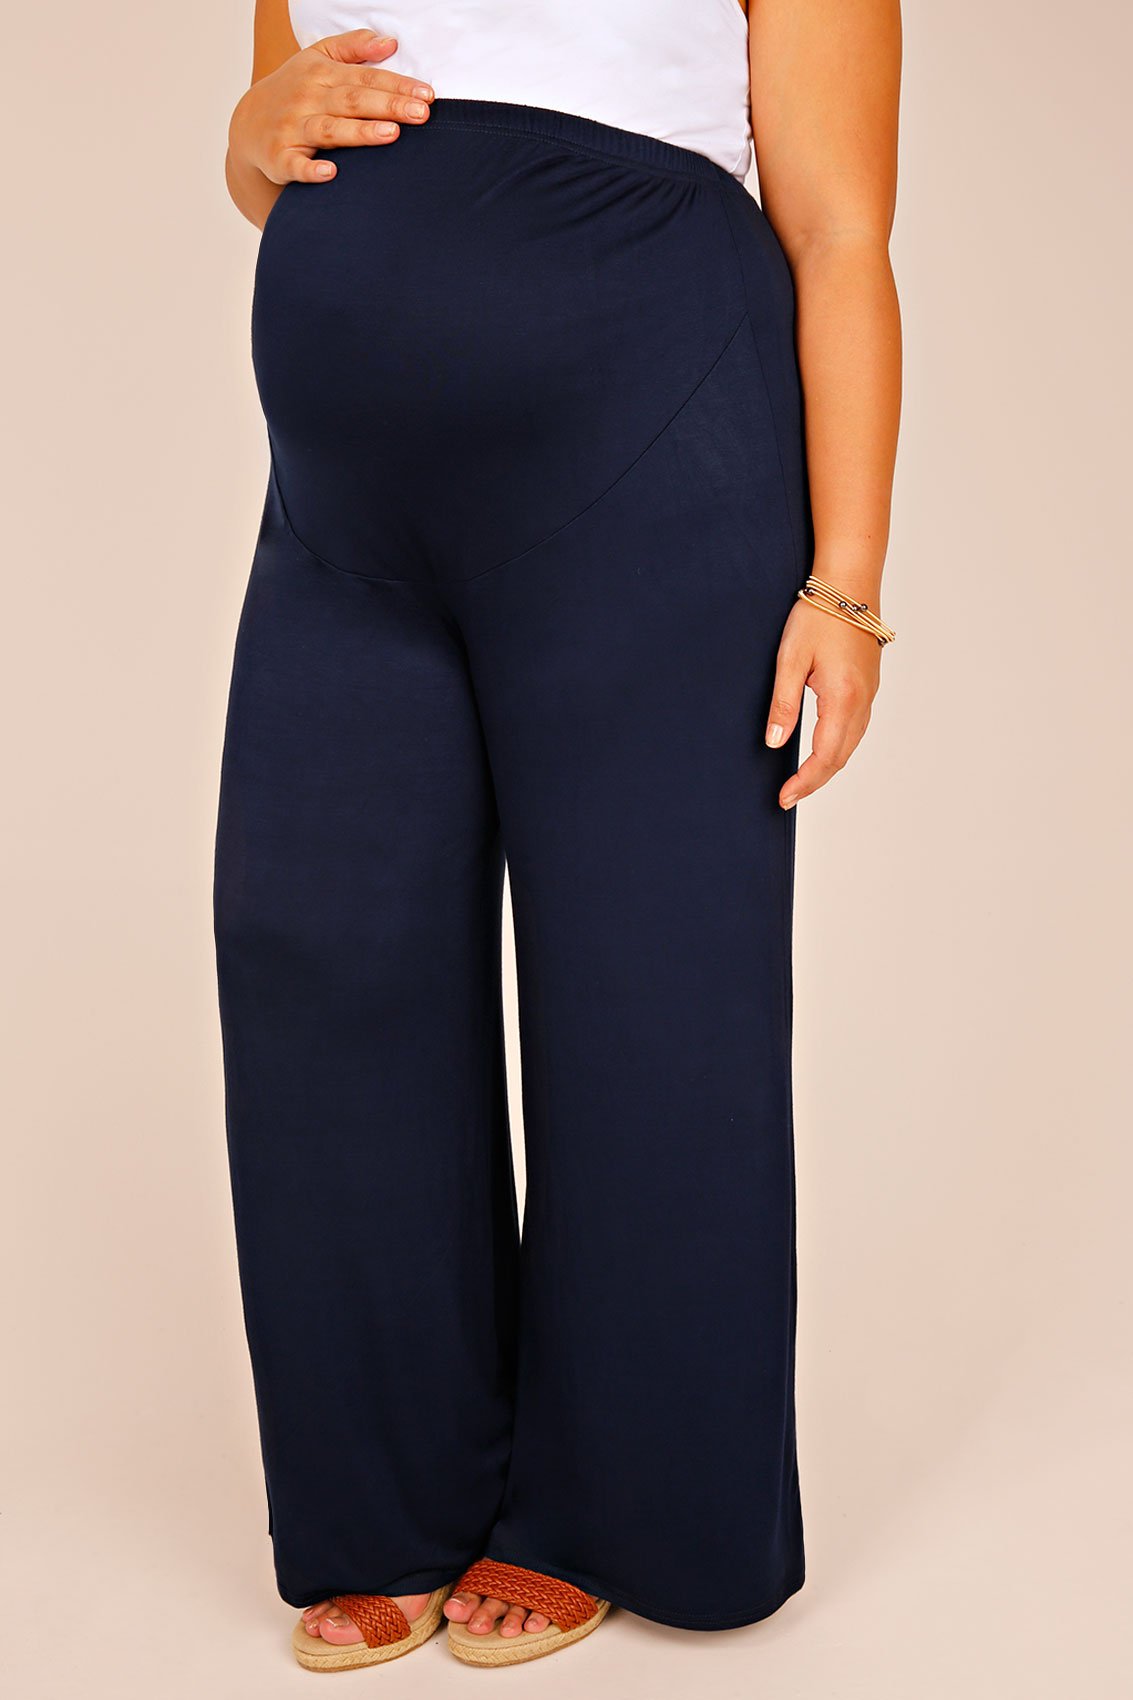 BUMP IT UP MATERNITY Black Palazzo Trousers With Comfort 